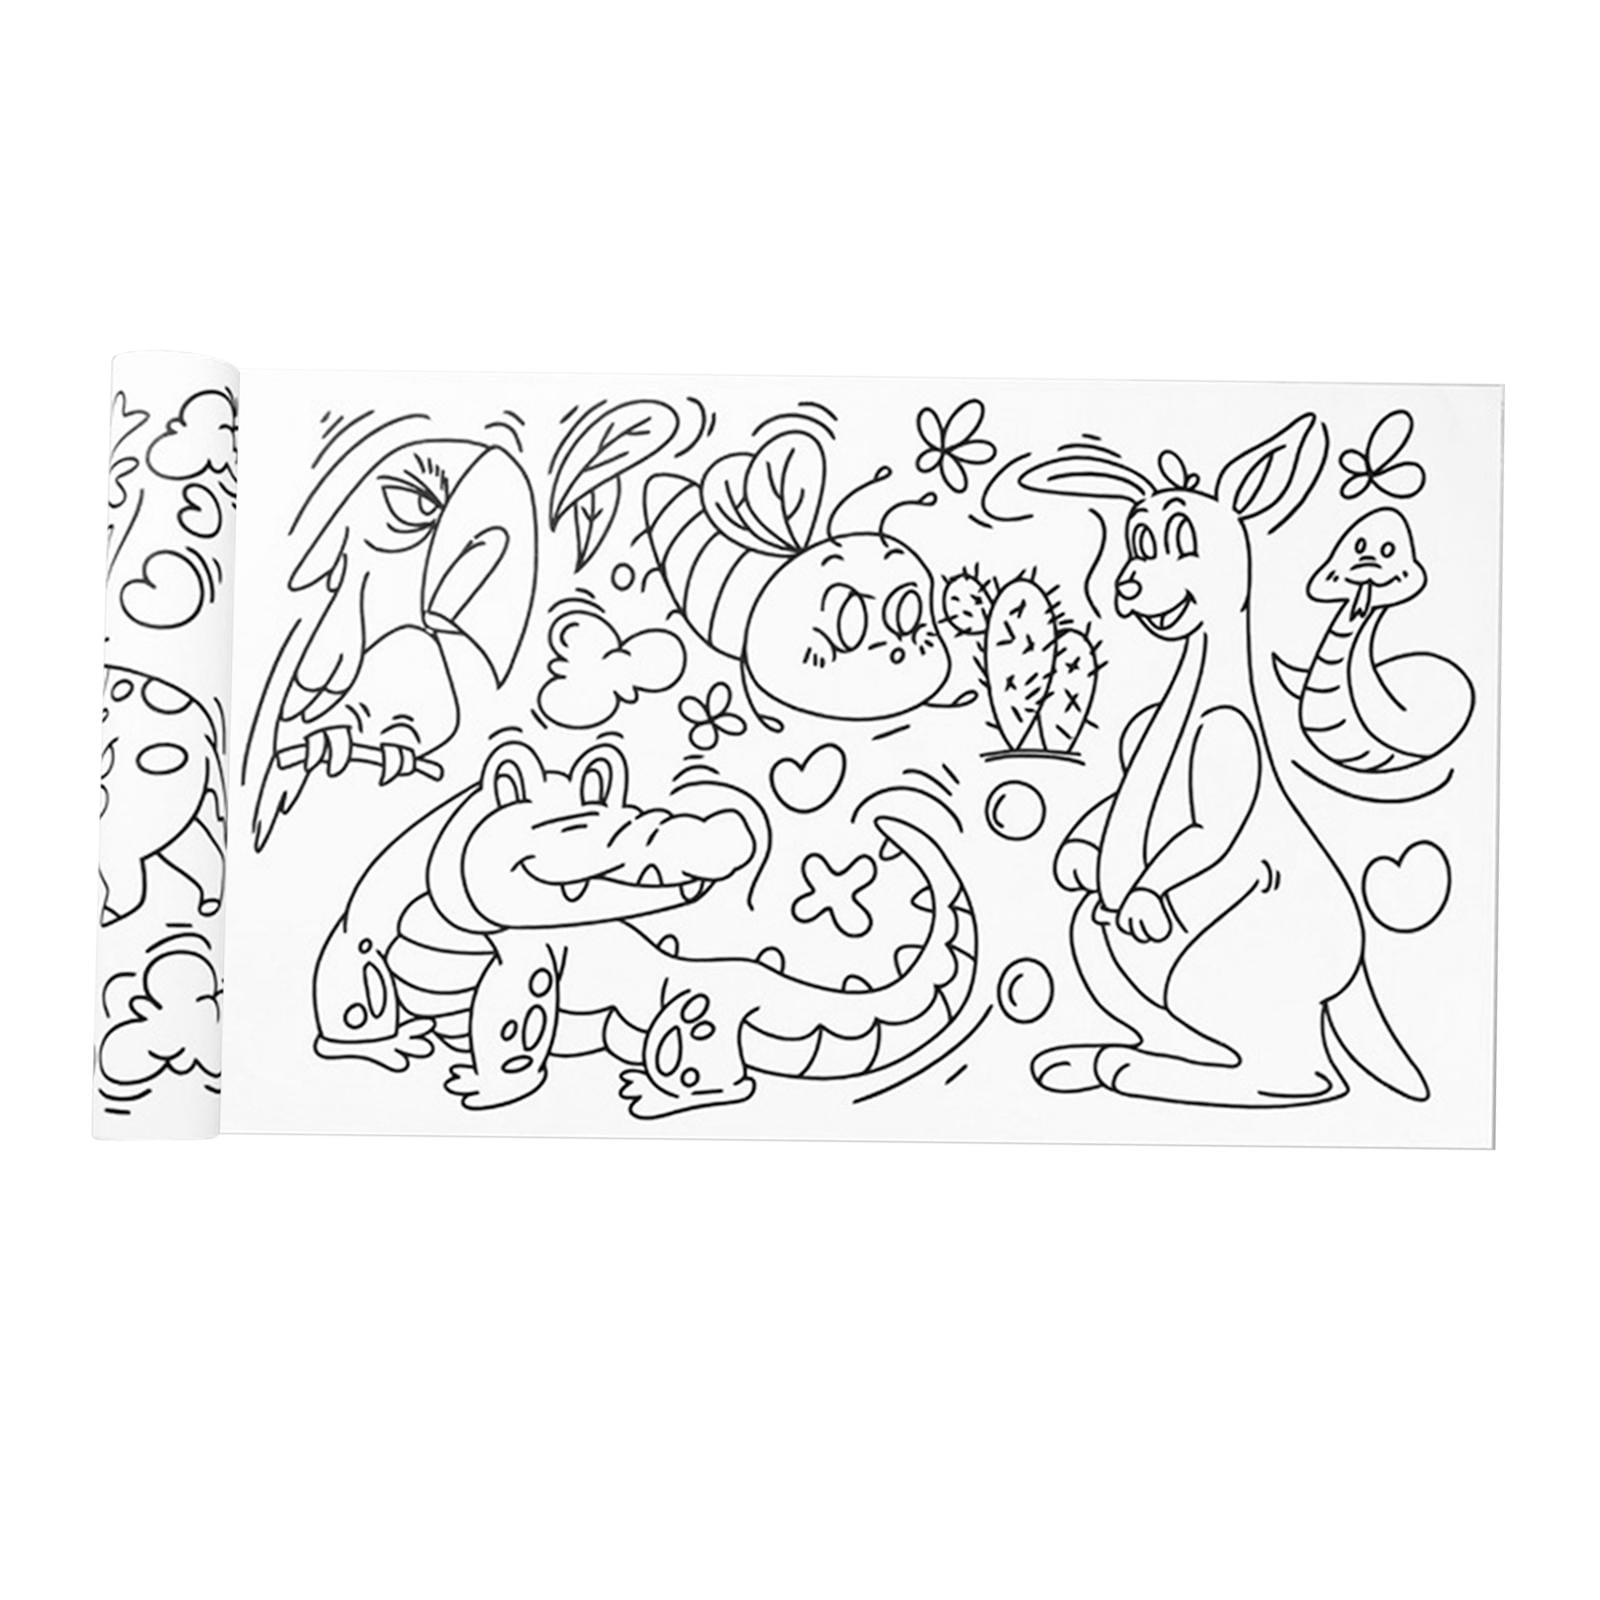 COHEALI 8 Rolls Graffiti Drawing Paper tracing Paper for Drawing Sketch  Paper for Drawing Art Paper for Coloring Painting Decal Drawing for Kids